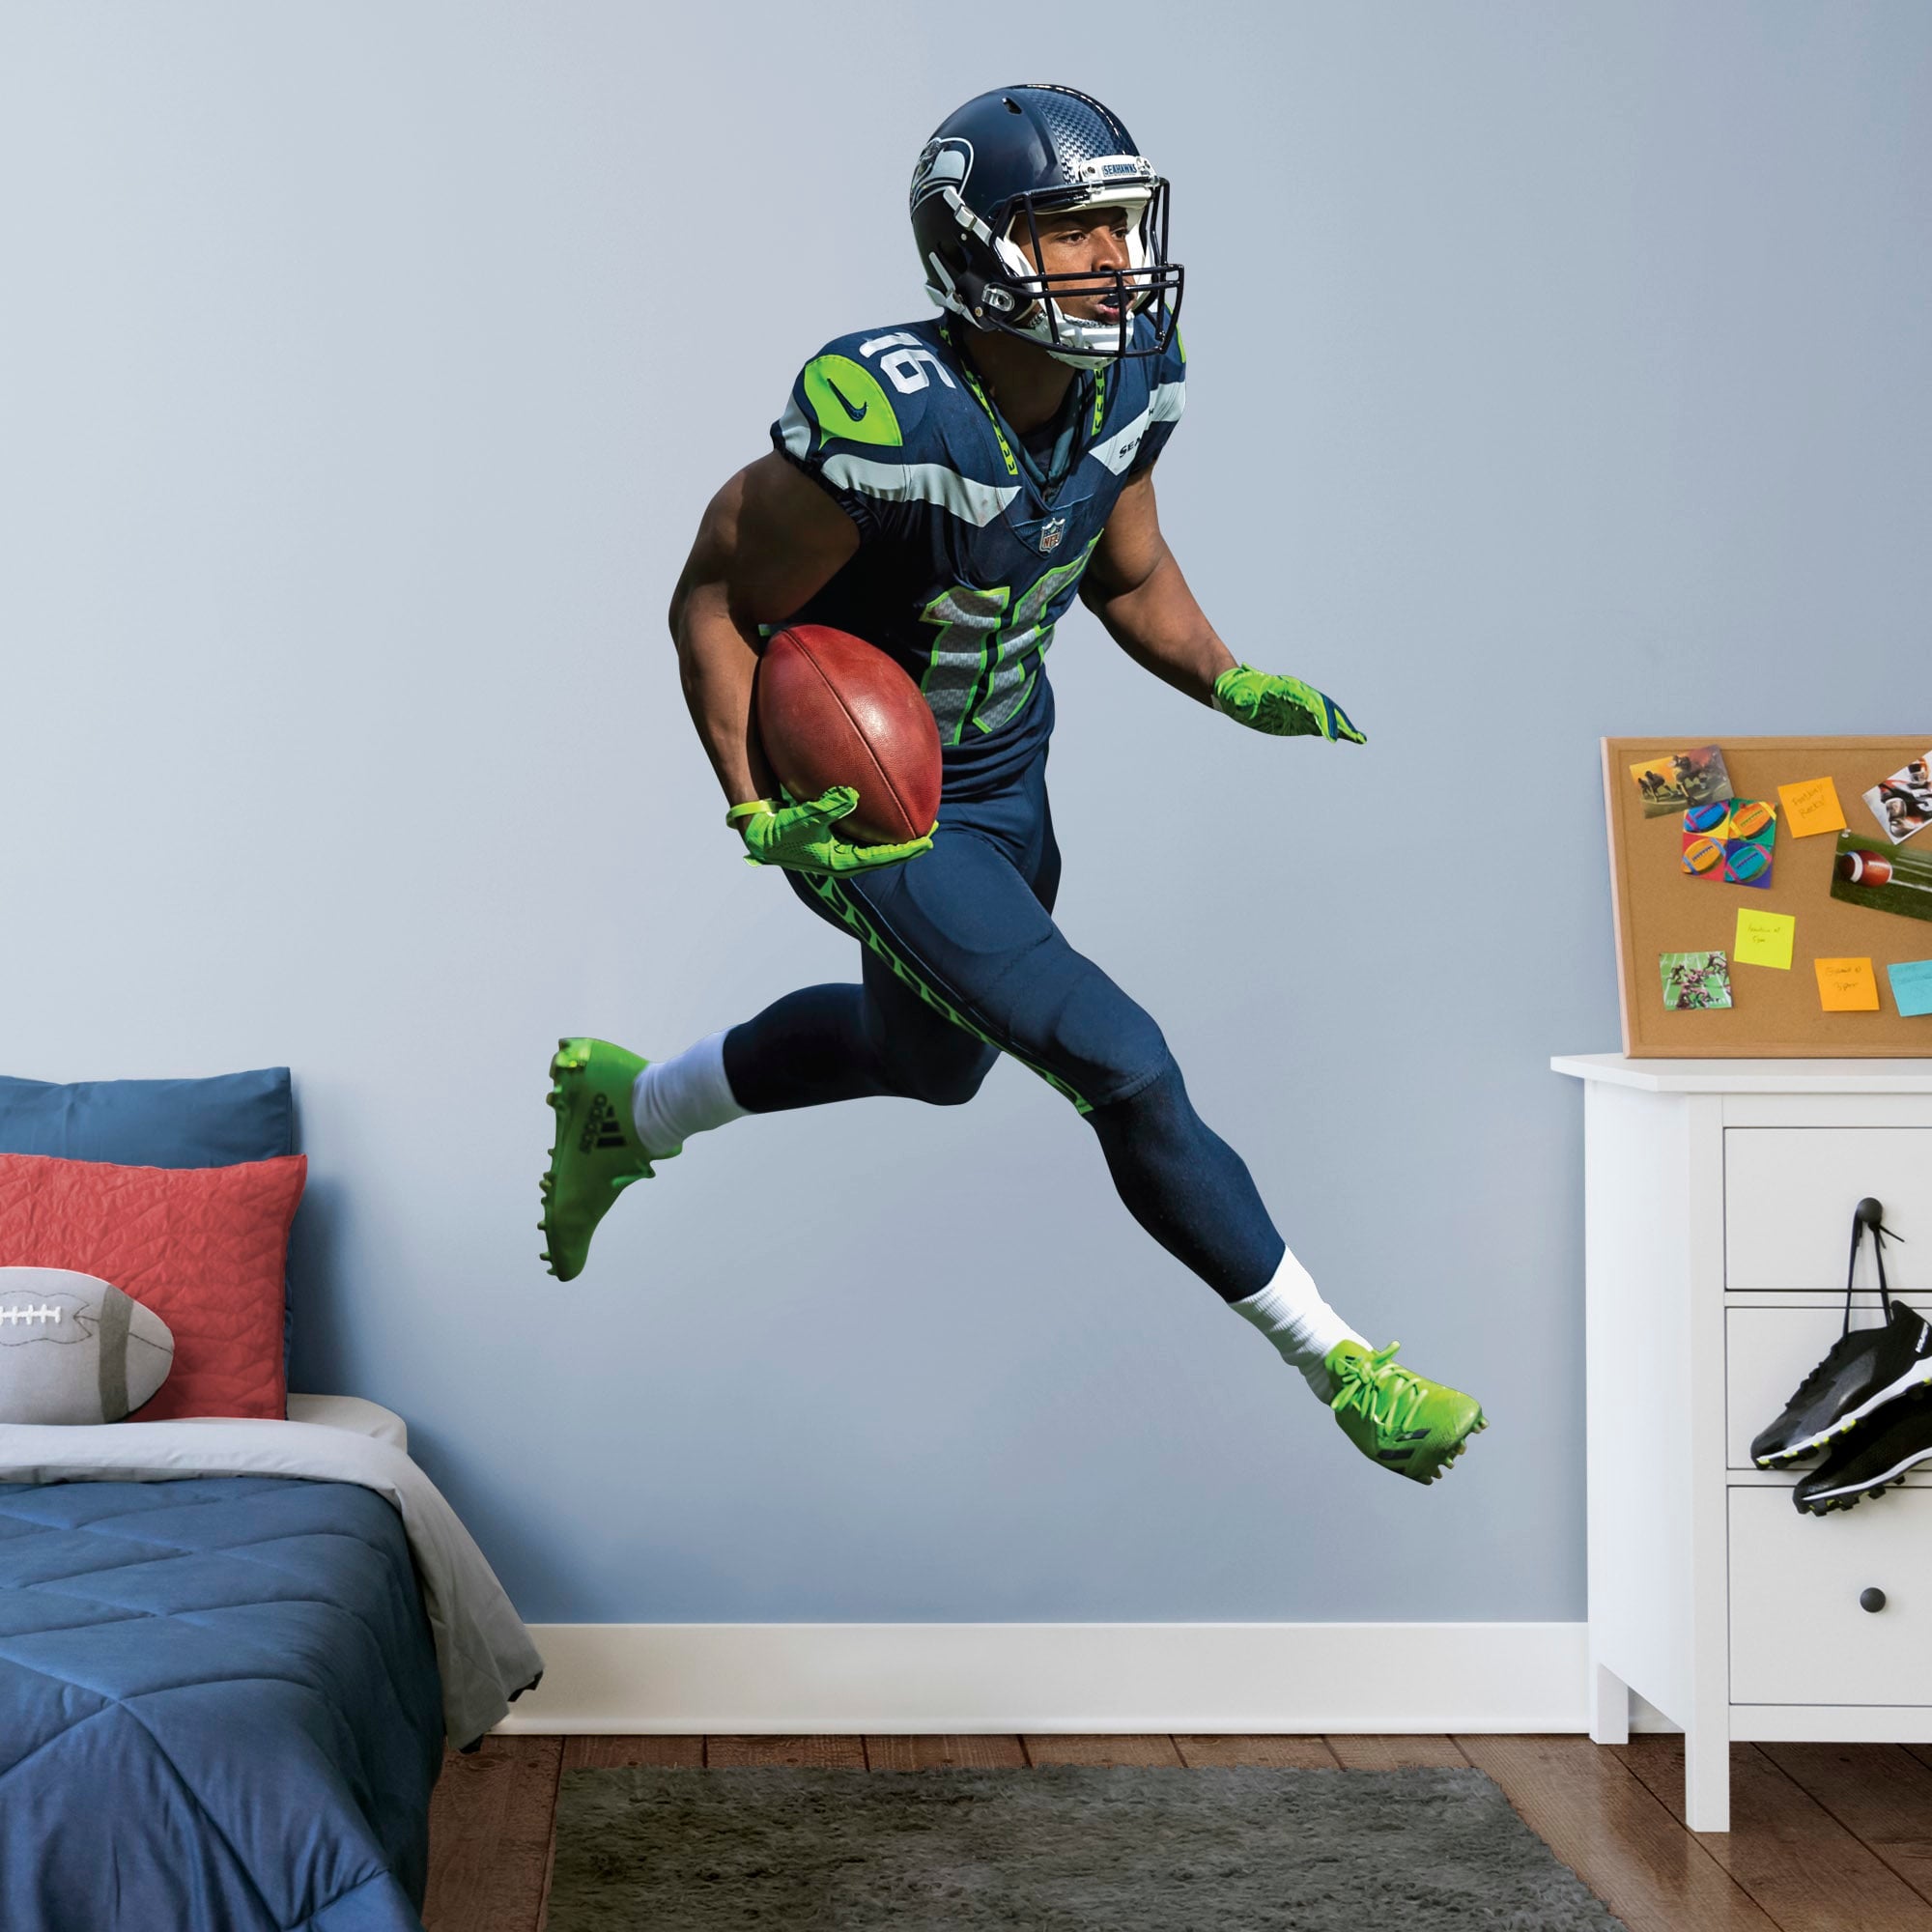 Tyler Lockett for Seattle Seahawks - Officially Licensed NFL Removable Wall Decal Life-Size Athlete + 2 Decals (52"W x 76"H) by